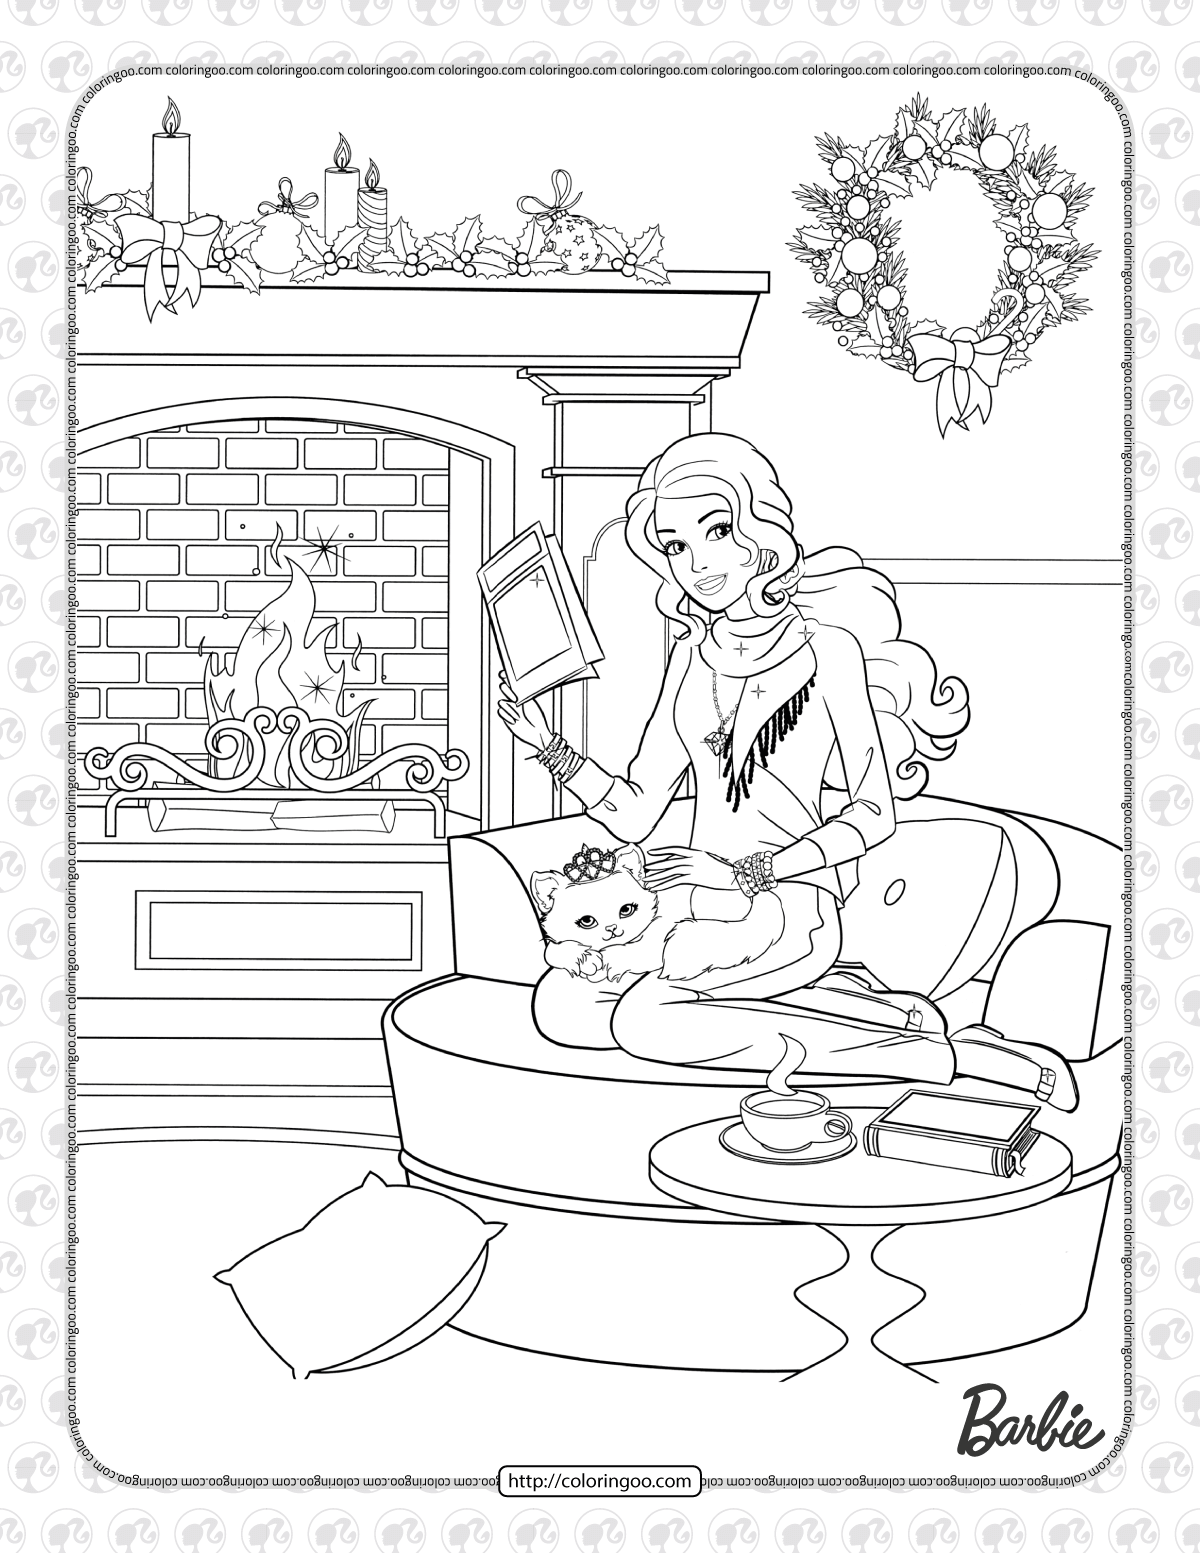 barbie reading a book by the fireplace coloring page